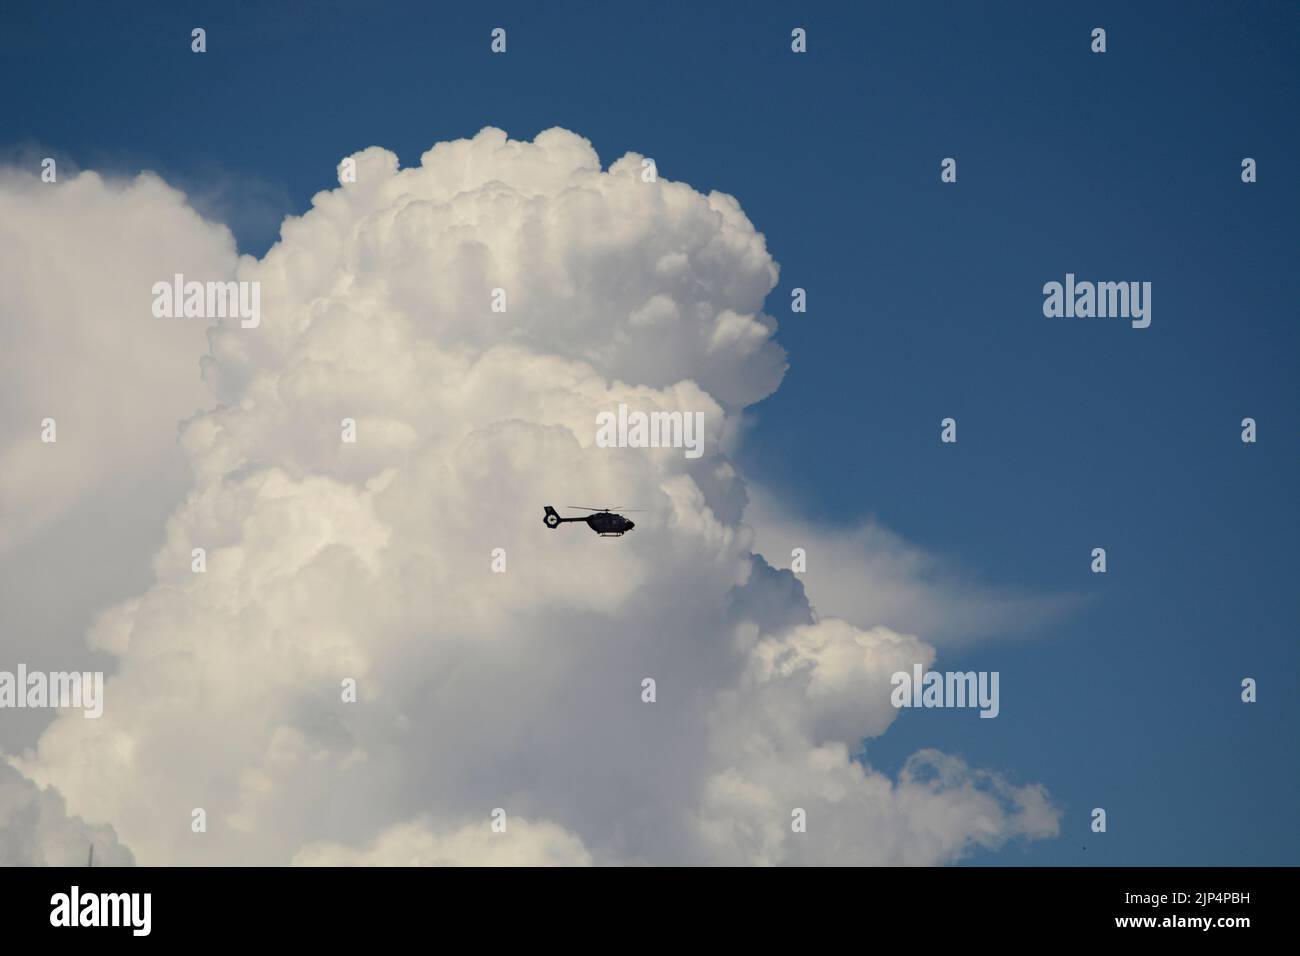 An Airbus Deutschland MBB-BK helicopter flies in front of towering cumulus clouds over Santa Fe, New Mexico. Stock Photo